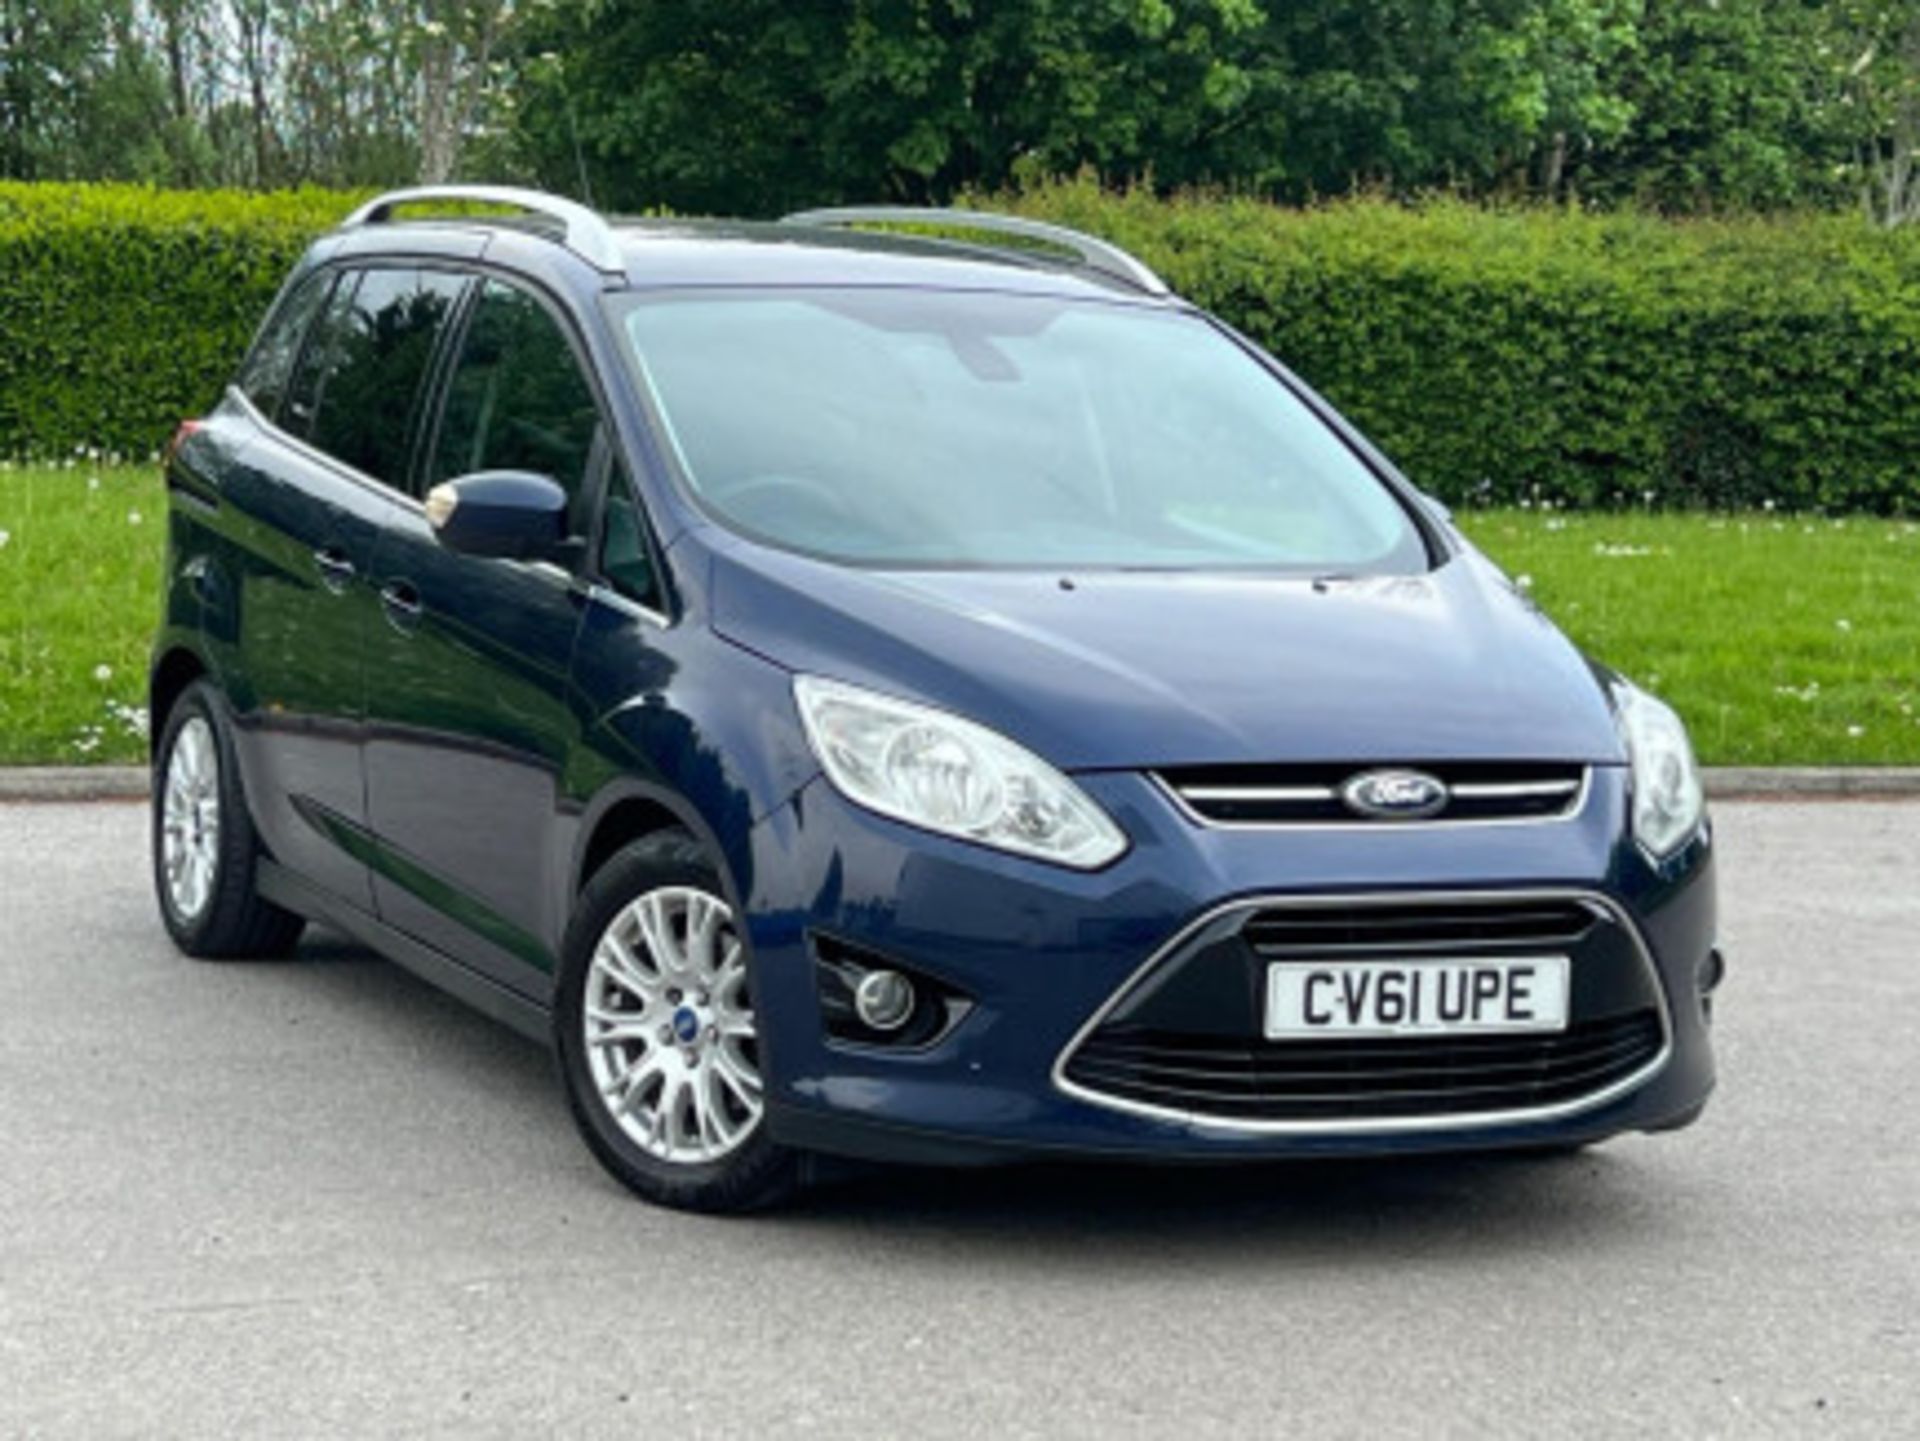 STYLISH AND SPACIOUS 2011 FORD GRAND C-MAX 1.6 TDCI >>--NO VAT ON HAMMER--<< - Image 72 of 136